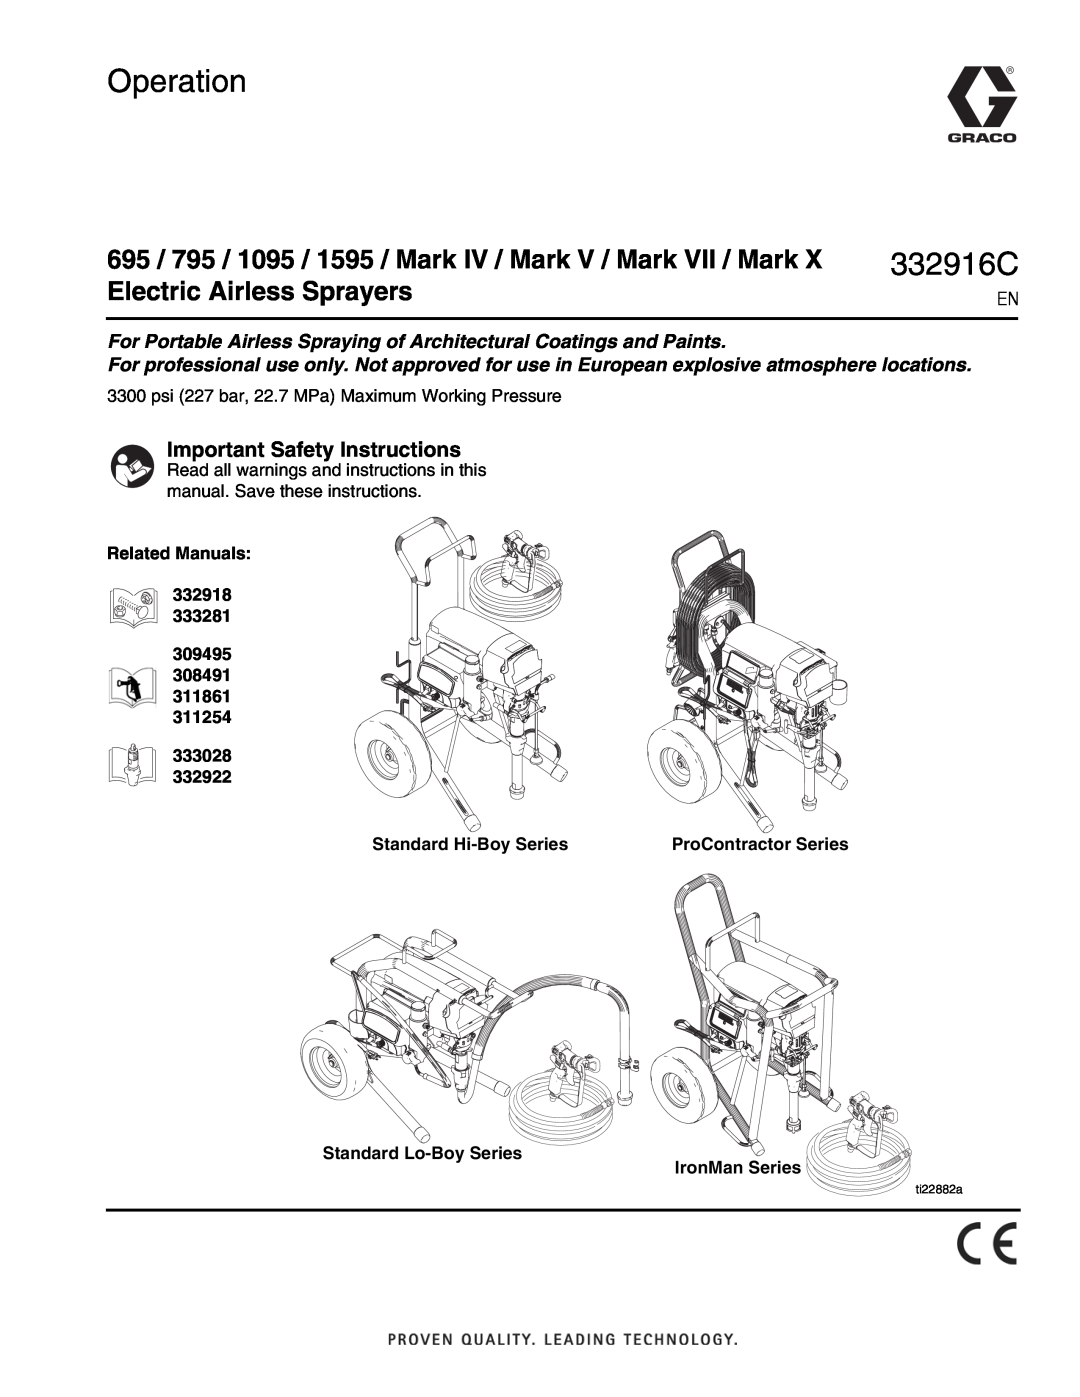 Graco Mark VII, 795 important safety instructions 332916C, Important Safety Instructions, 332922, Standard Hi-Boy Series 